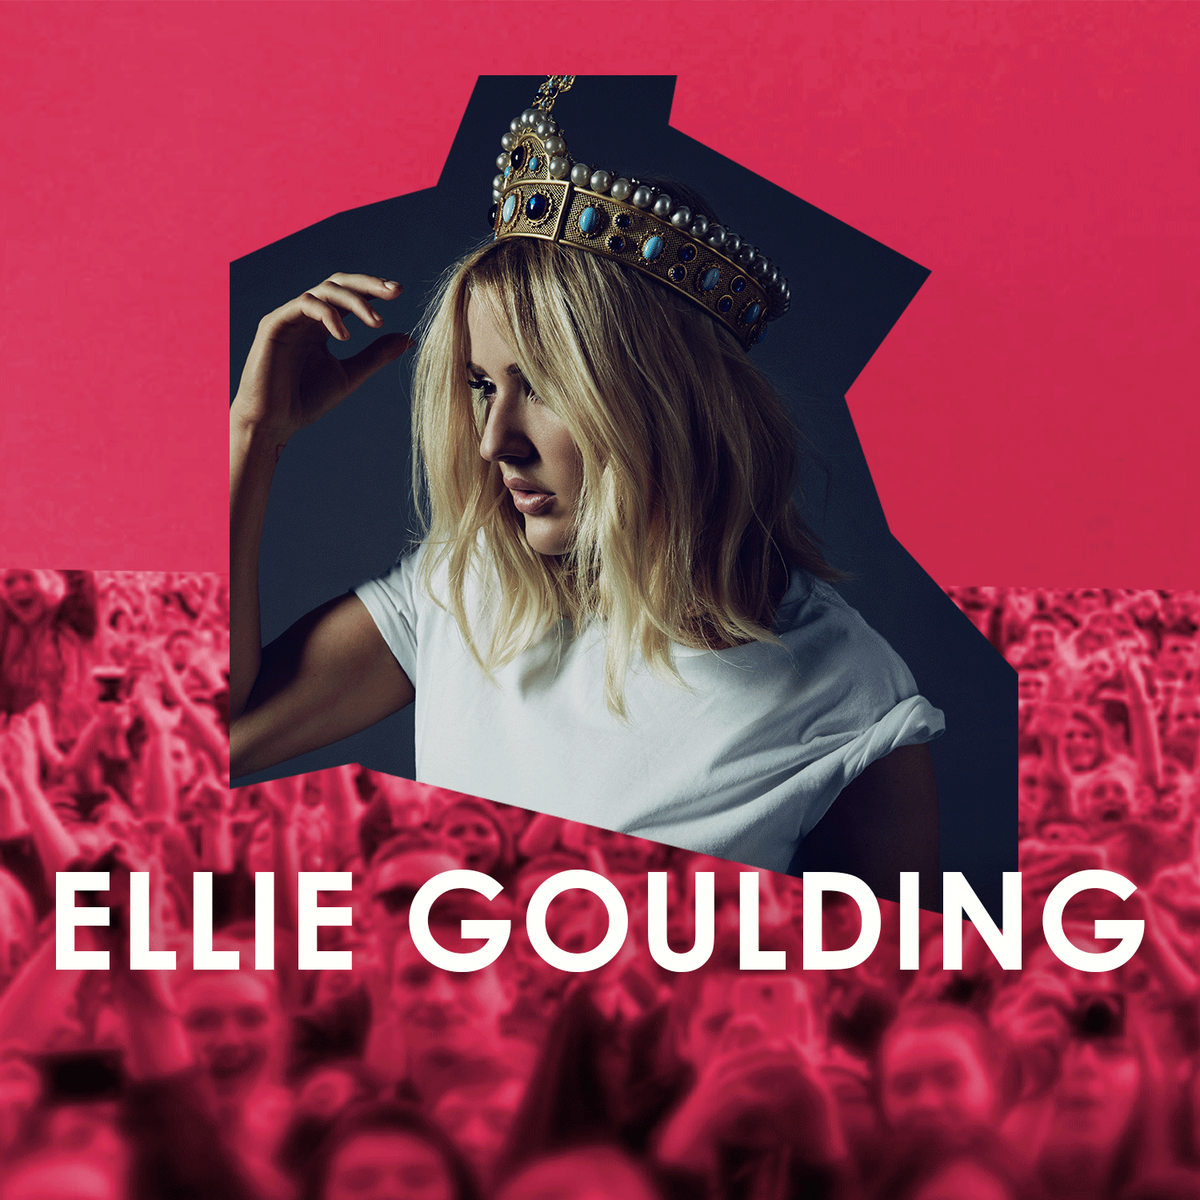 RT @BBCR1: We're so excited to announce that @elliegoulding will also be playing #BigWeekend in Exeter https://t.co/4t4HBZtjzI https://t.co…